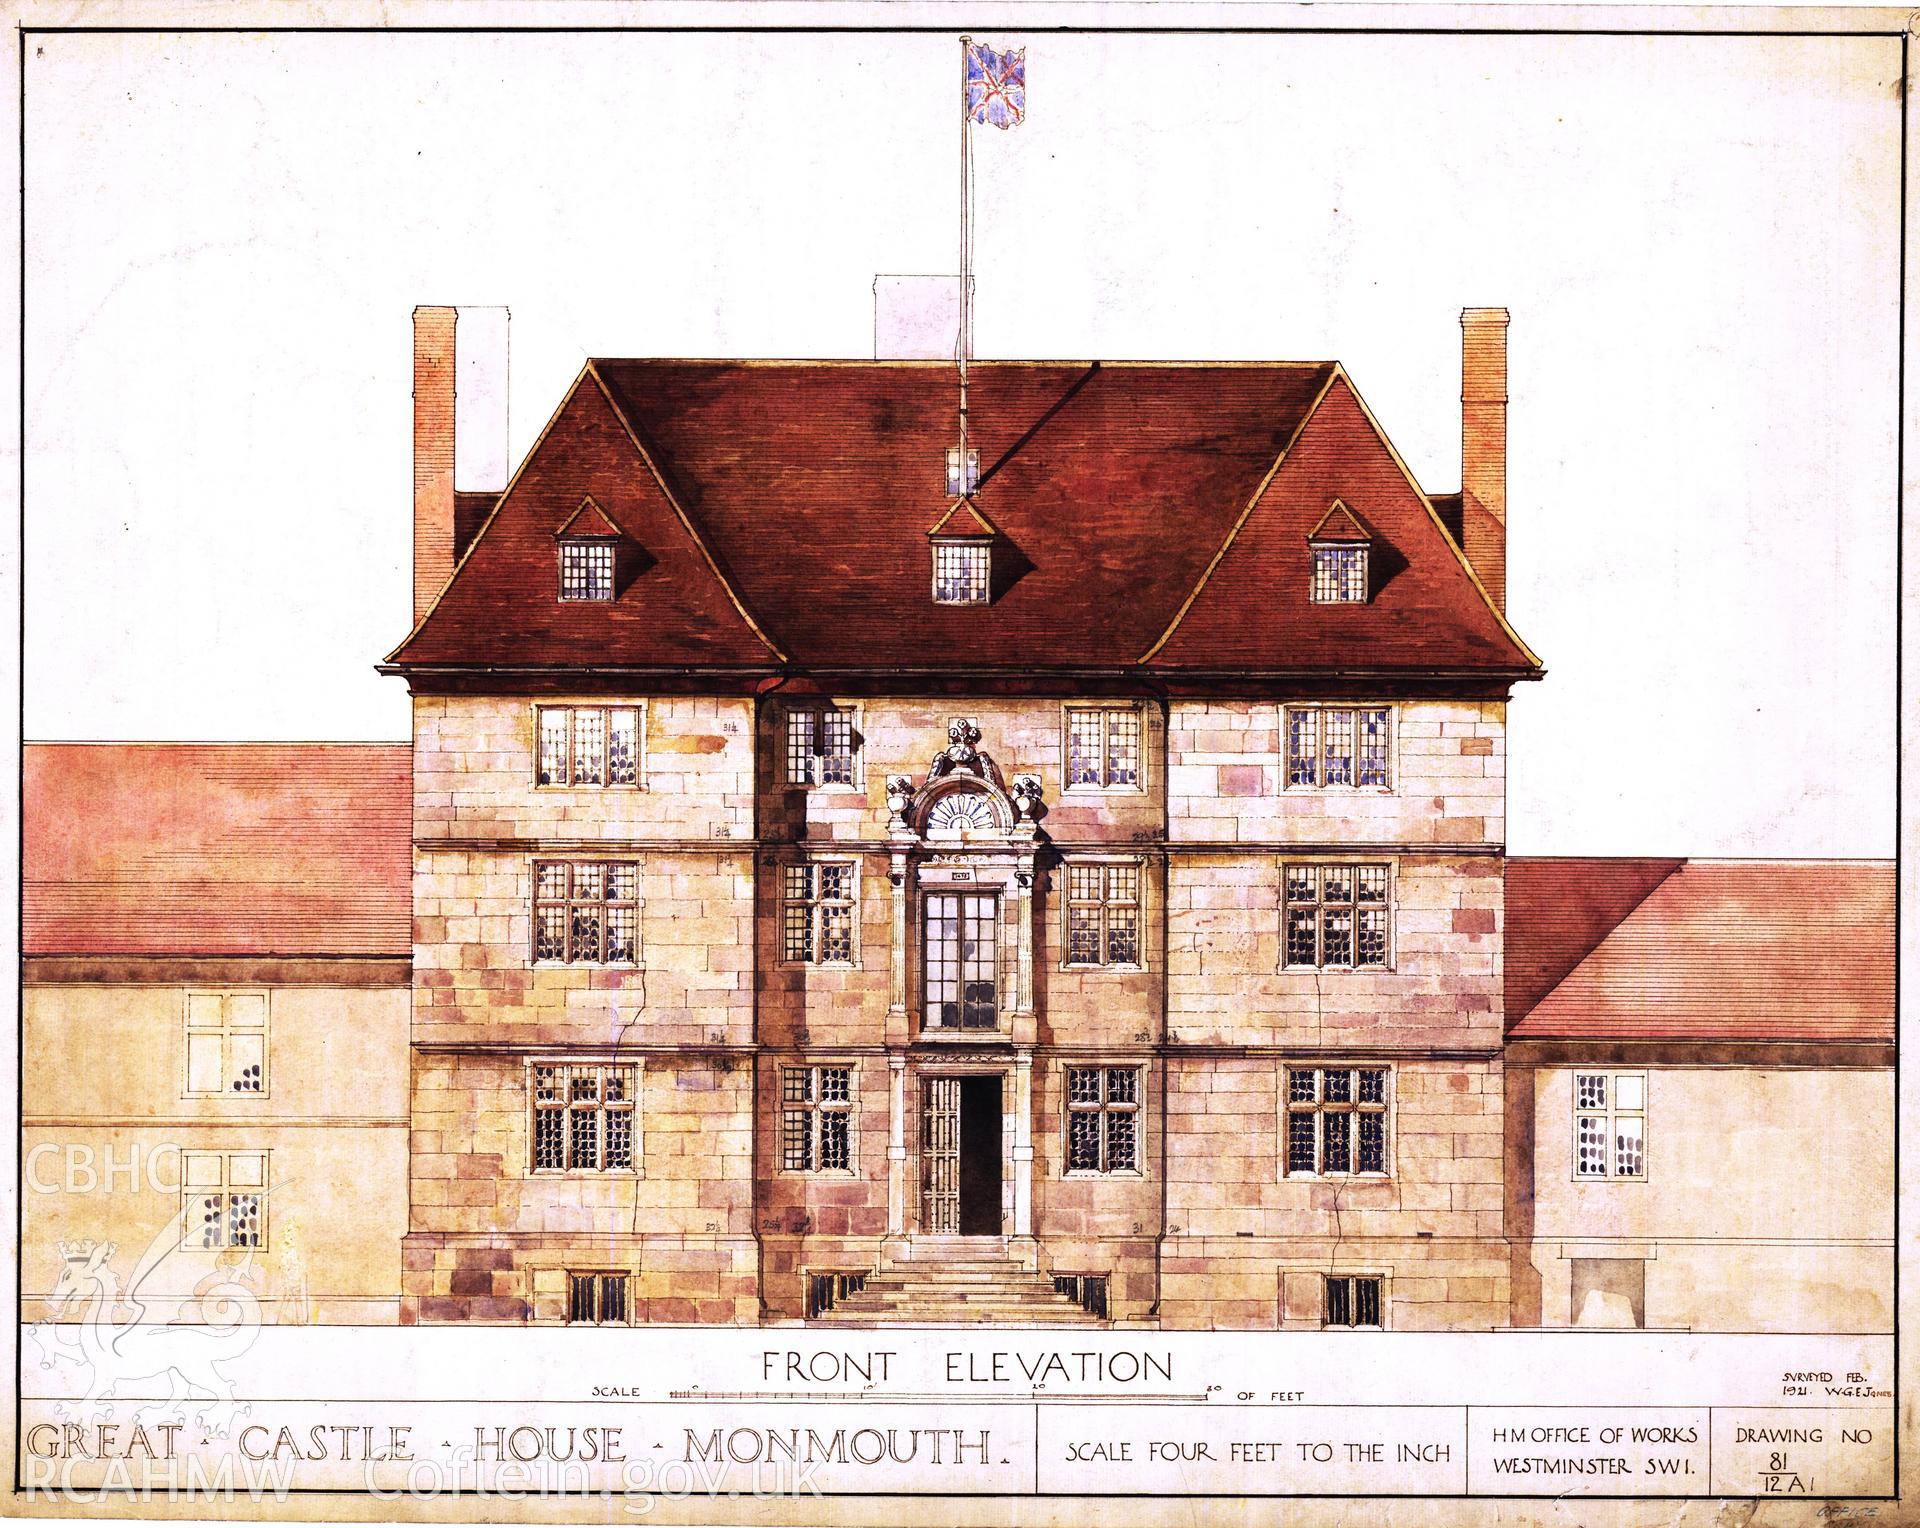 Cadw guardianship monument drawing of Monmouth Great Castle House. Front elveation of building. Cadw Ref. No:81/12A1. Scale 1:48.